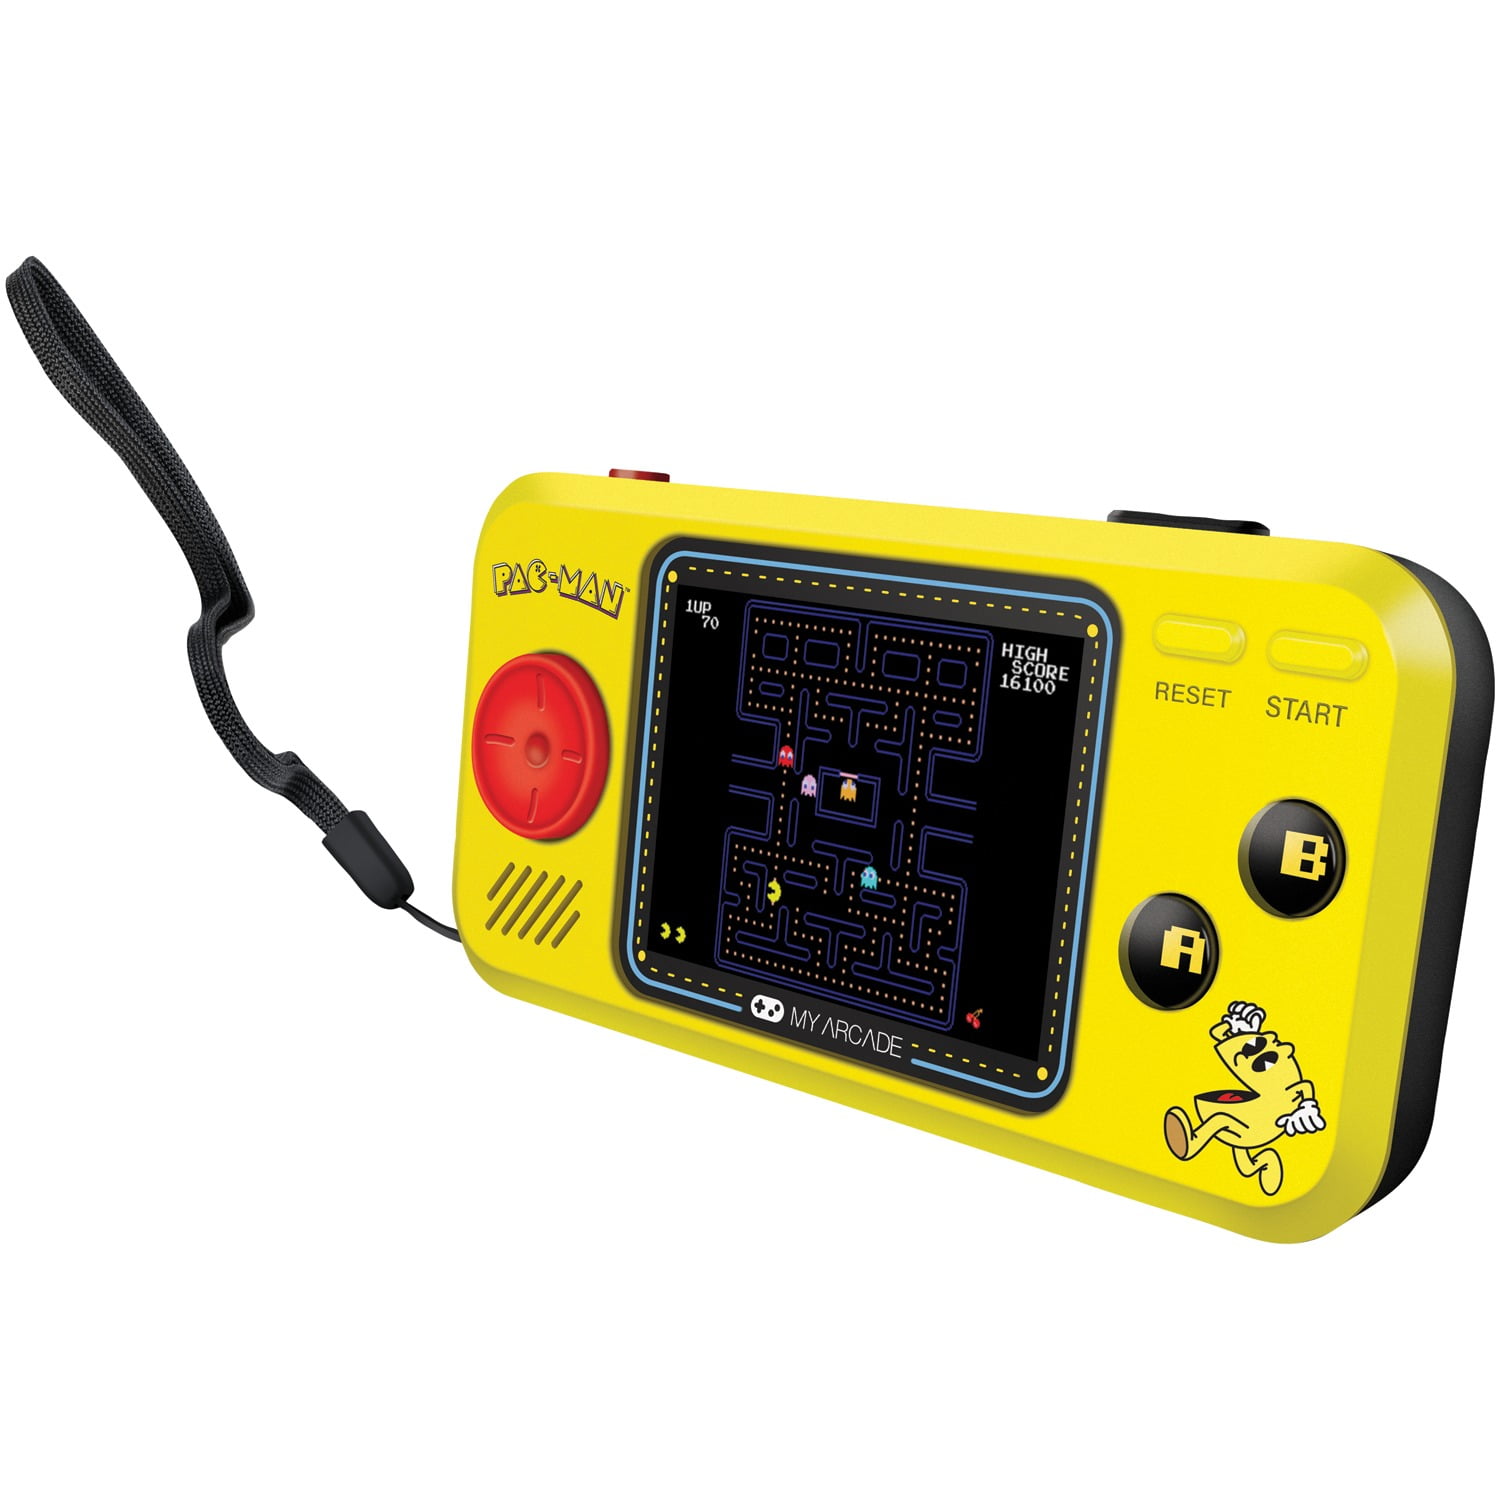 for sale online Pac-Man Pocket Player Handheld Game Console 3 Built-In Games Pac-Man, Pac-Panic, Pac-Mania - MyArcade DRMDGUNL3227 0845620032273 